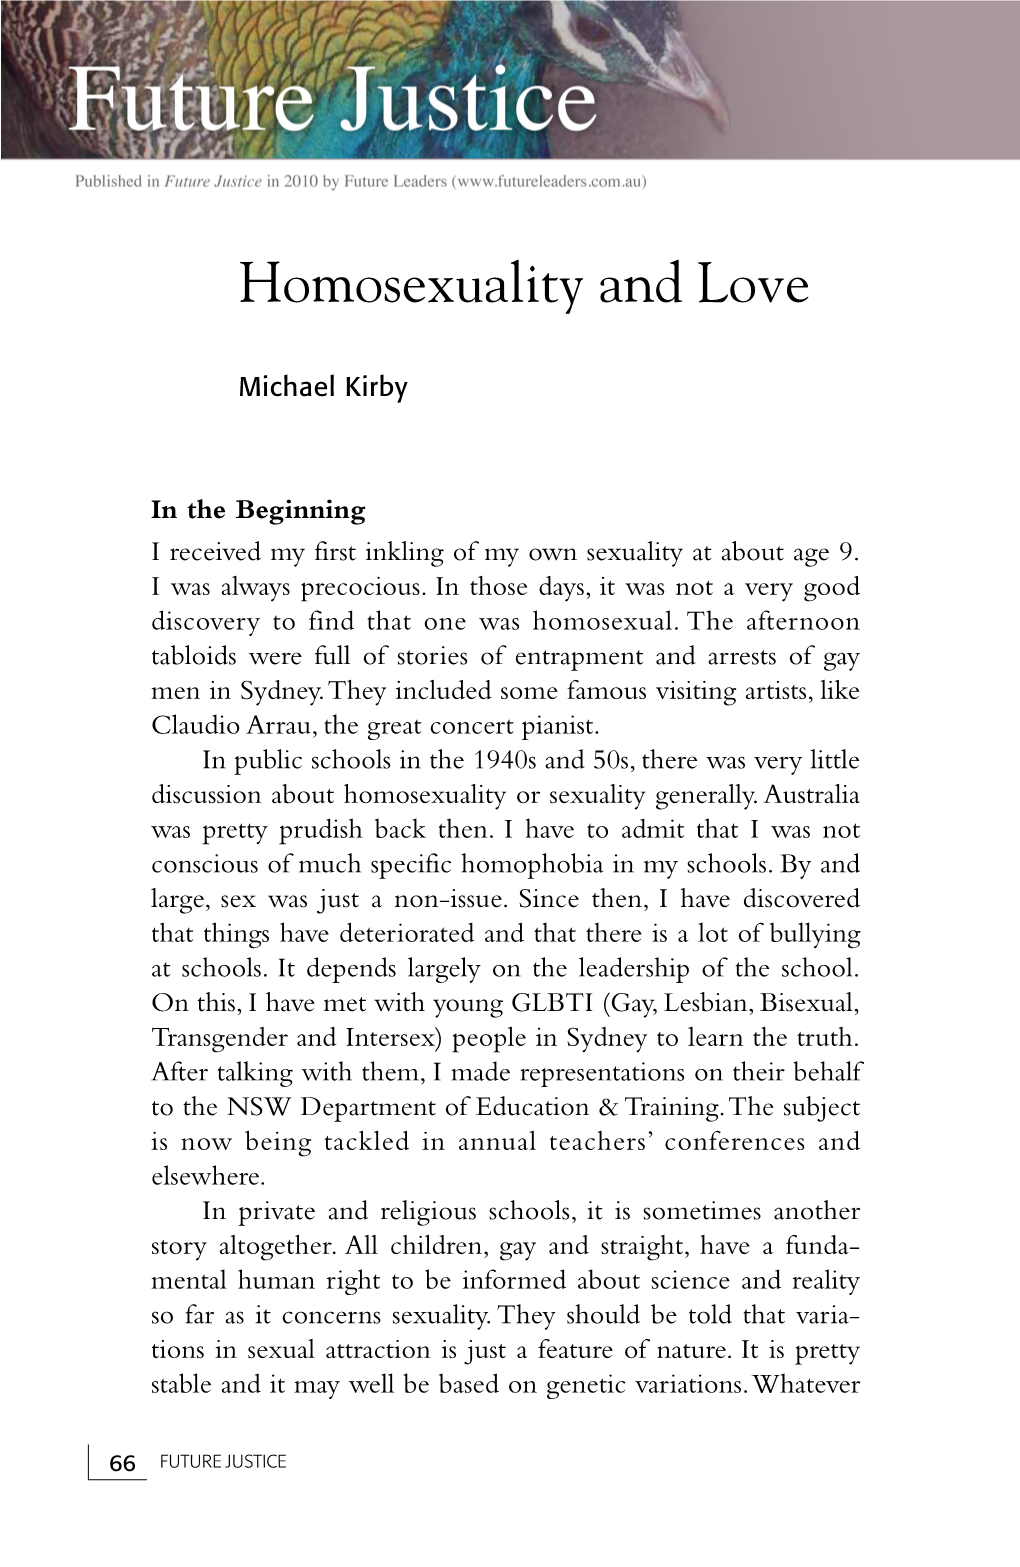 Homosexuality and Love